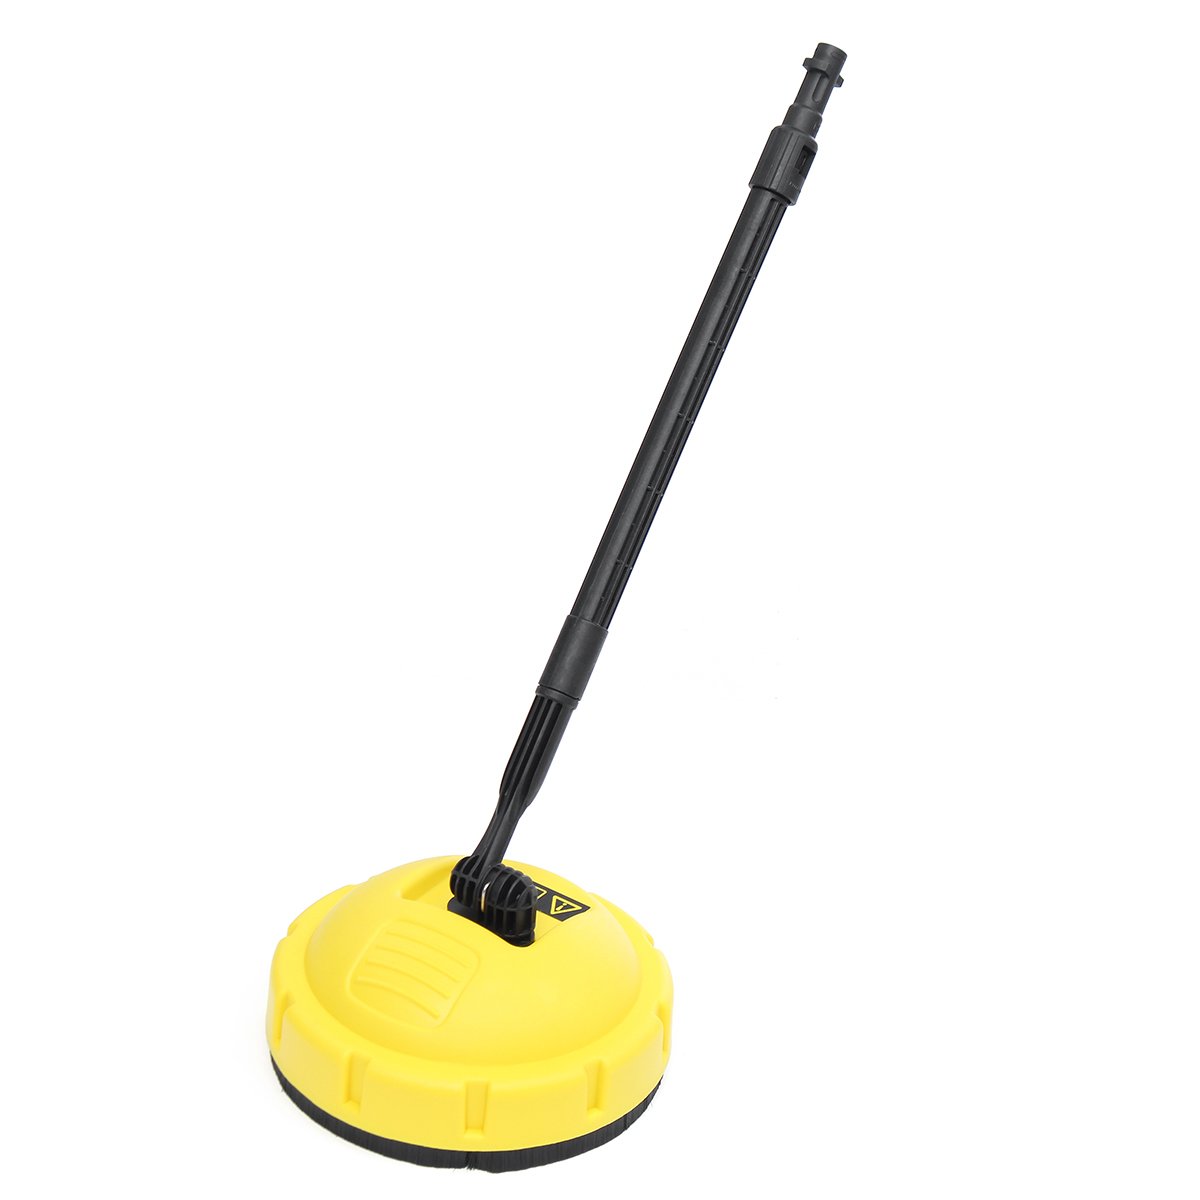 Pressure-Washer-Rotary-Surface-Patio-Cleaner-Floor-Brushing-Washing-Tool-For-Karcher-LAVOR-1330987-5